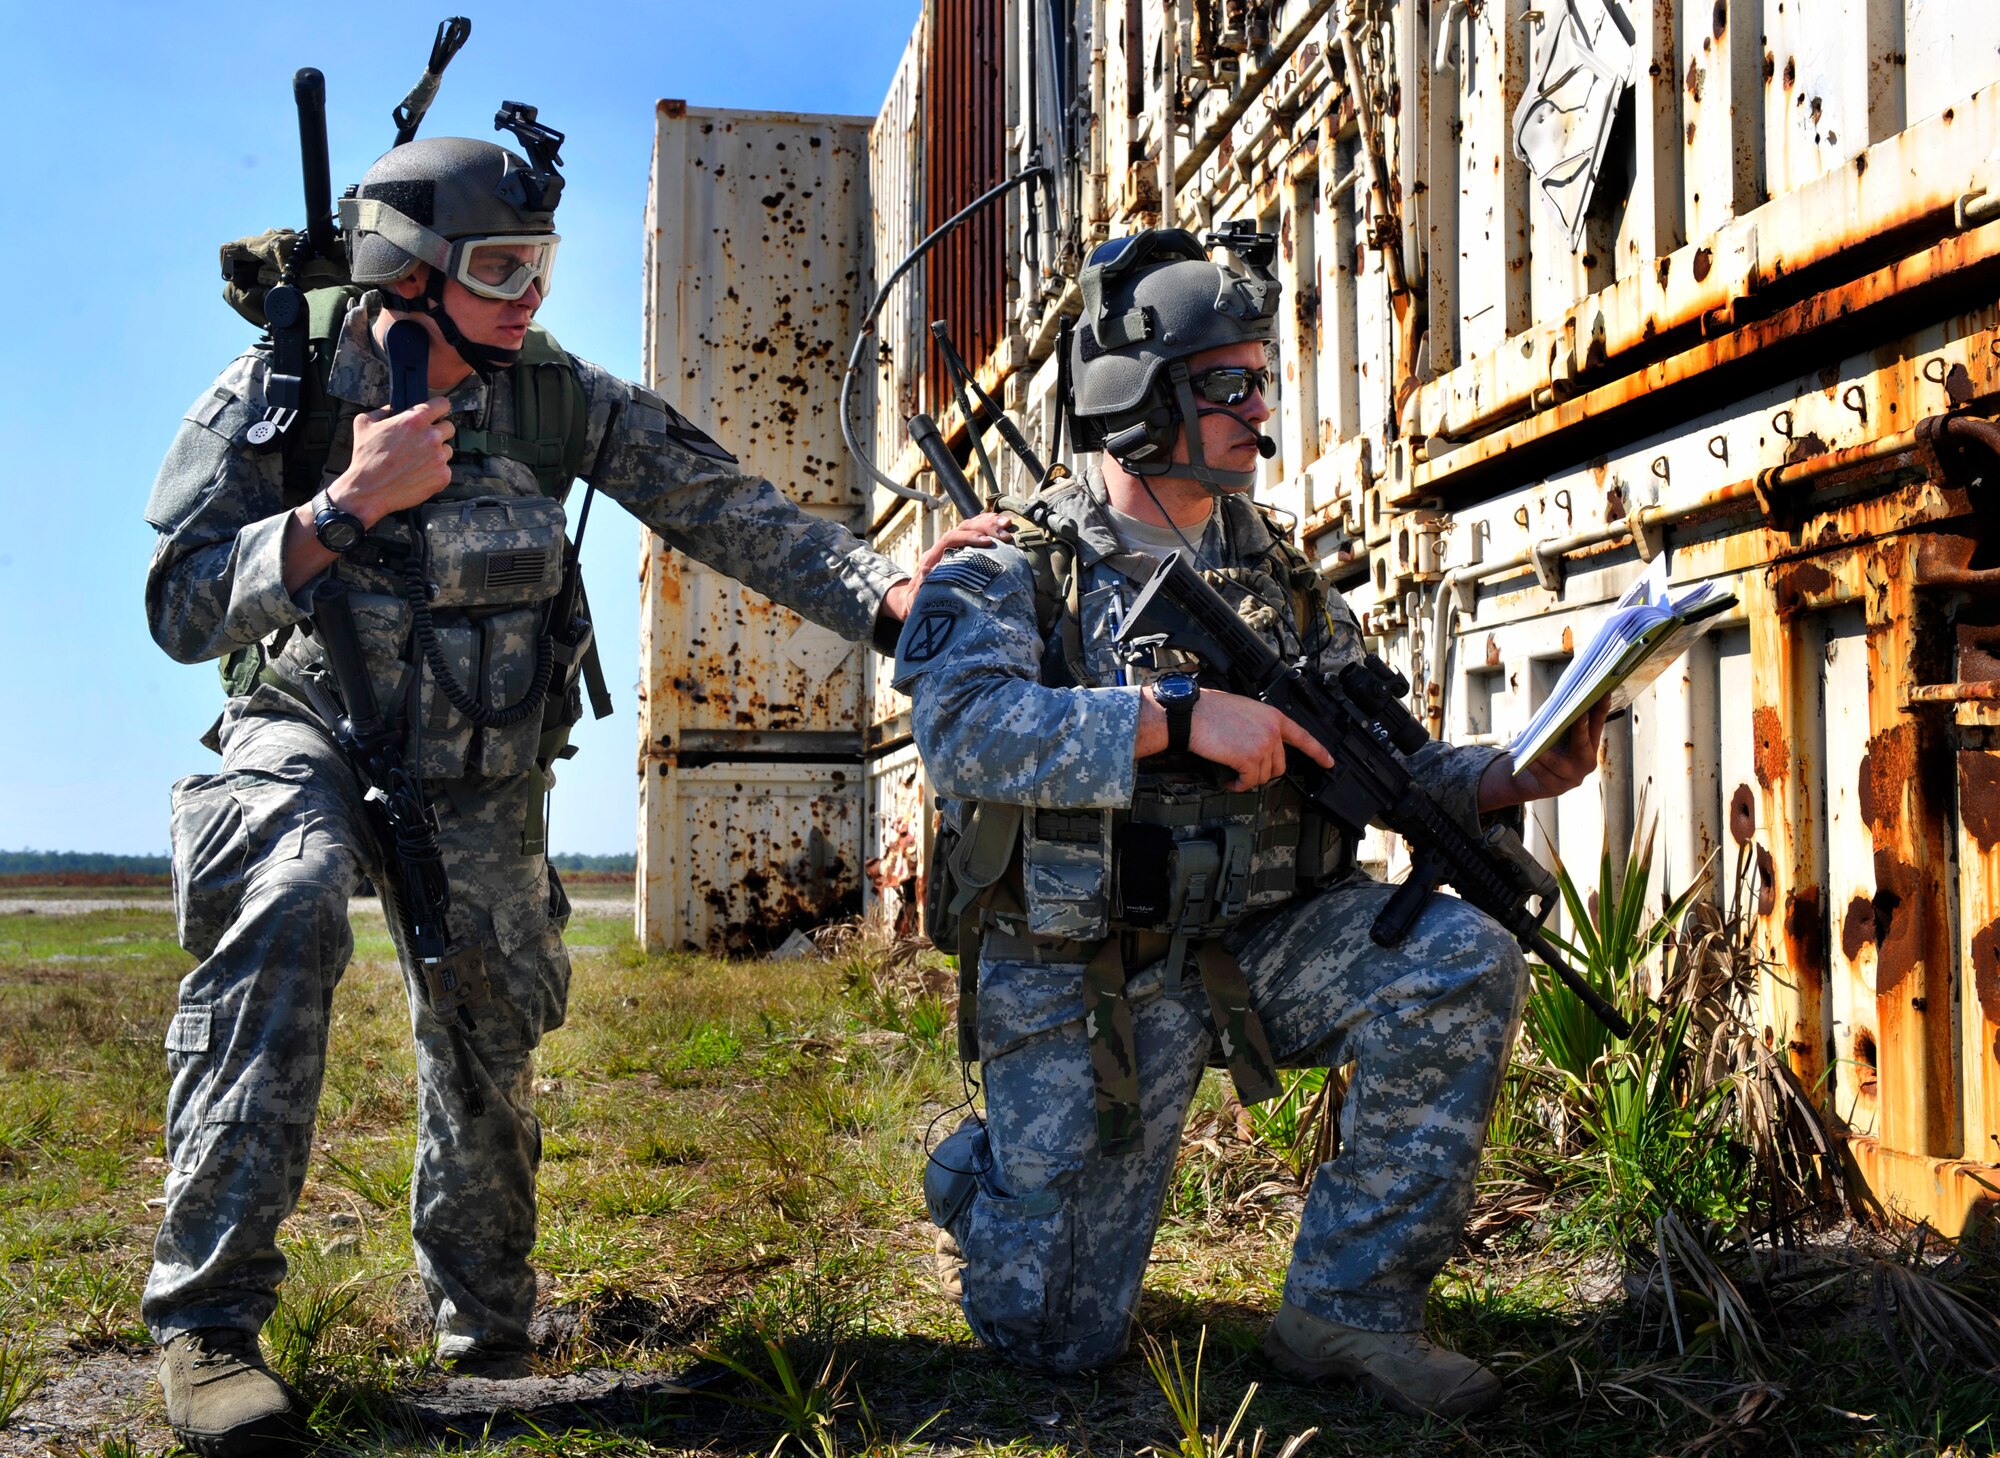 AVON PARK, Fla.-- Staff Sgt. Nicholas Palazzolo and Airman 1st Class Brian Nawrocki, 18th Air Support Operations Group, Ft. Hood. Texas joint terminal attack controllers, prepare to call in close air support on a village during joint exercise ATLANTIC STRIKE 11-01 Feb. 15. The job of the JTACs was to coordinate with the ground commander on whether close air support was needed during their assault on the village. (U.S. Air Force photo/Airman 1st Class Nicholas Benroth)(RELEASED)